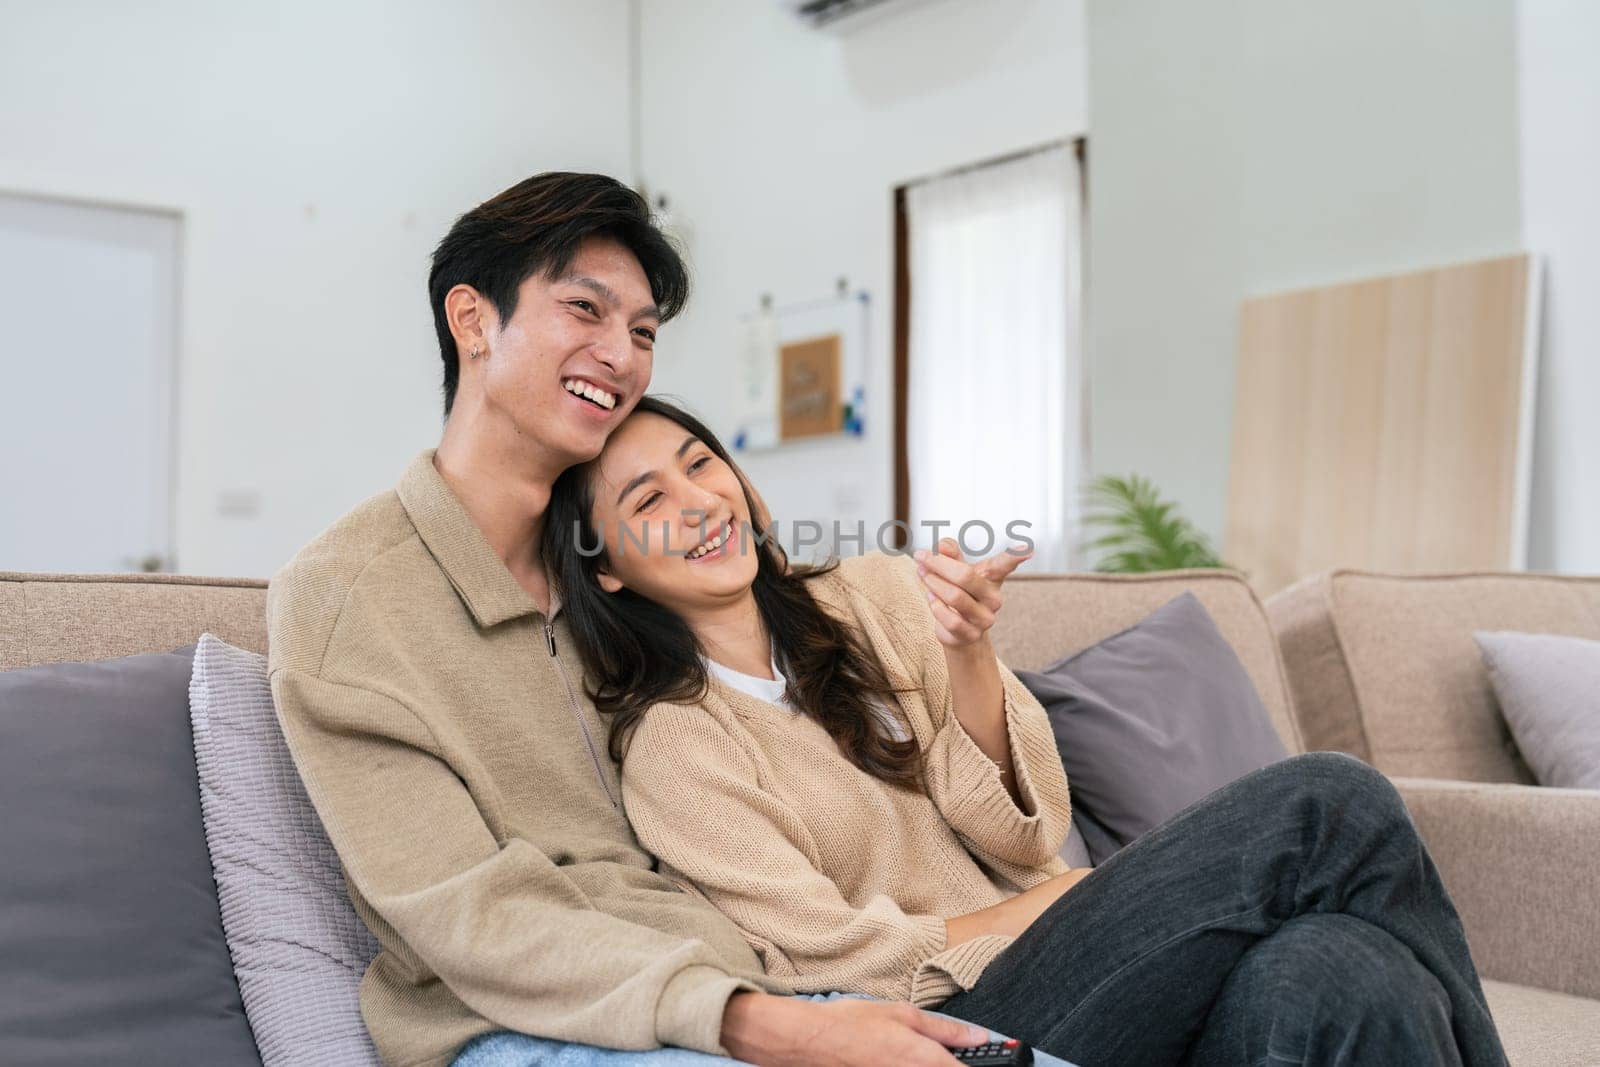 Couple Watches TV together while Sitting on a Couch in the Living Room. Girlfriend and Boyfriend embrace, cuddle, talk, smile and watch Television Streaming Services.